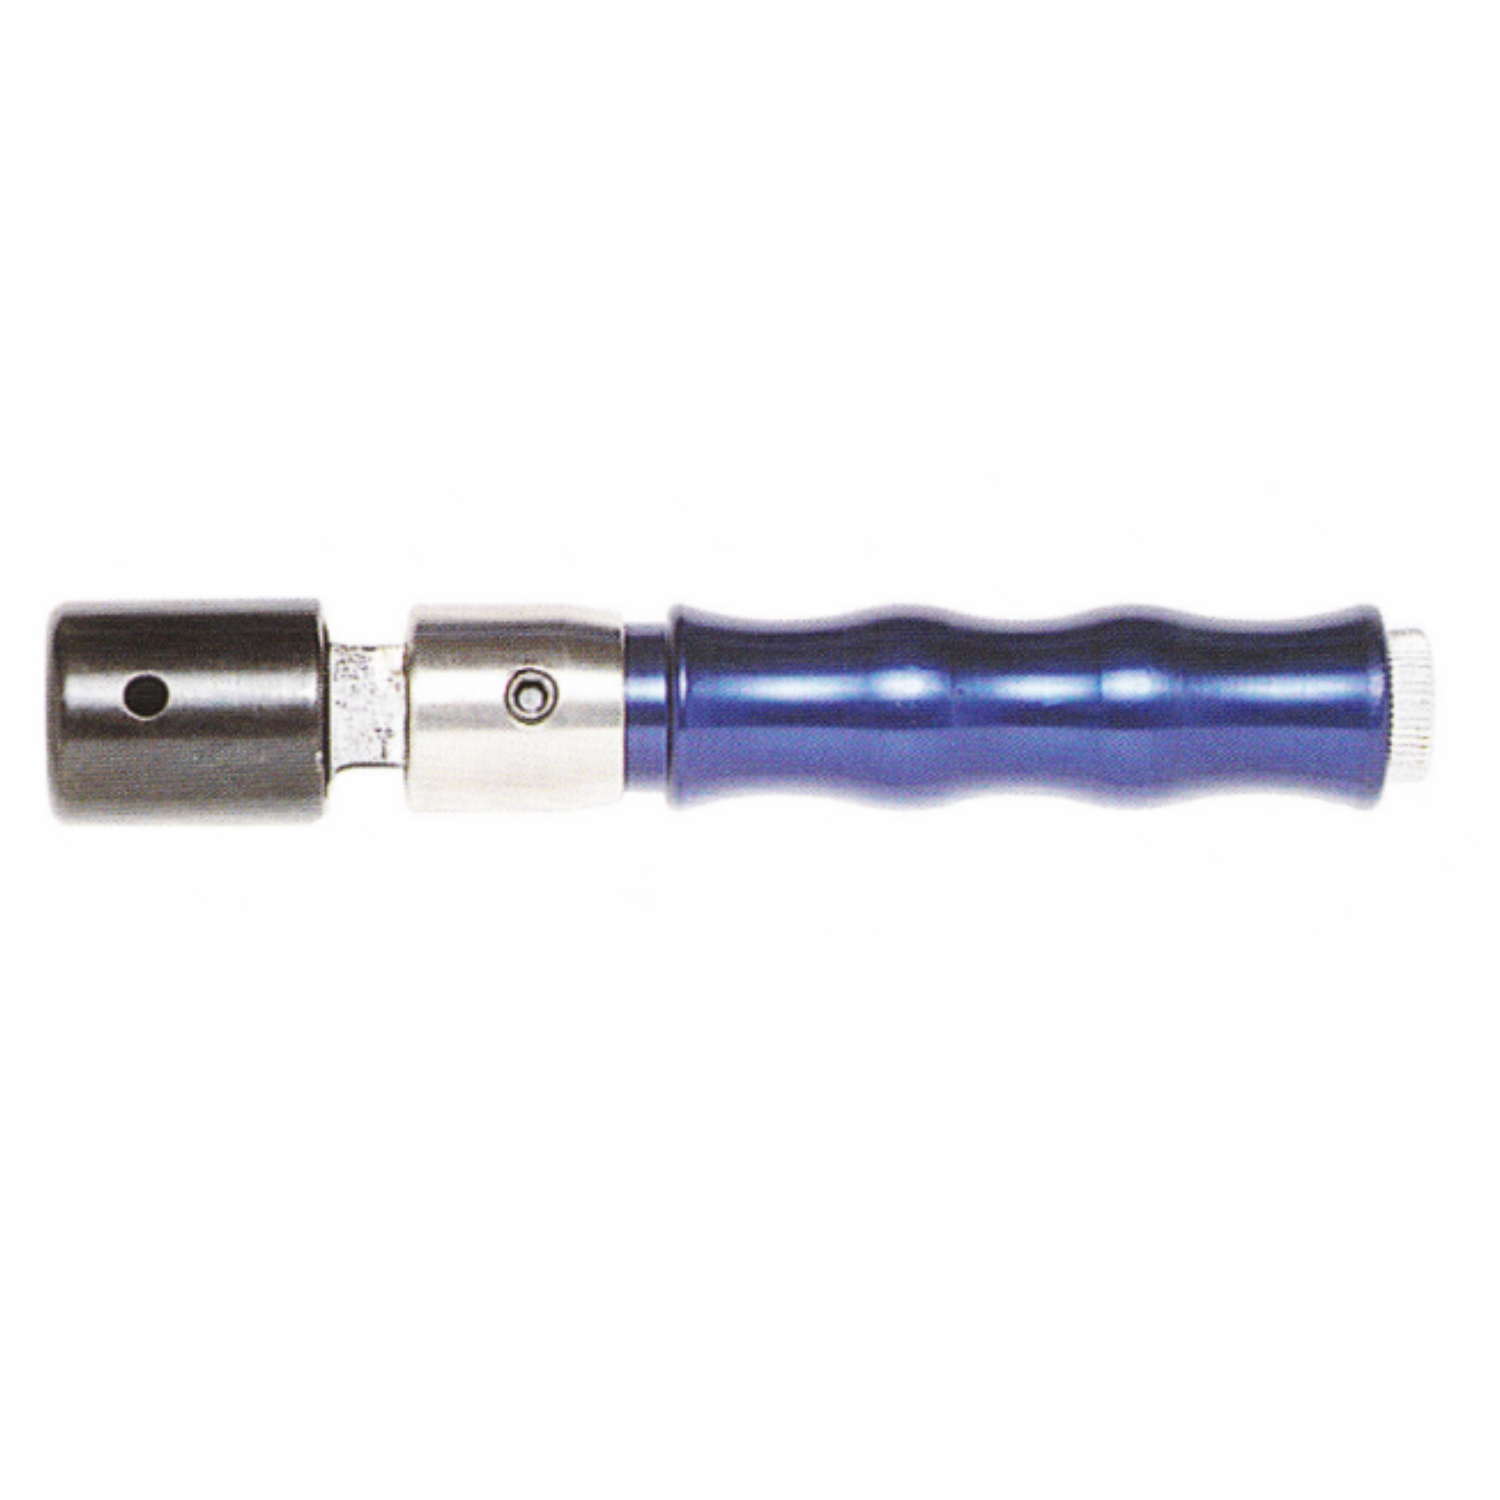 TECNOGI 505T Torque Wrench For Production Lines 0.5 - 5 Nm - Premium Torque Wrench from TECNOGI - Shop now at Yew Aik.